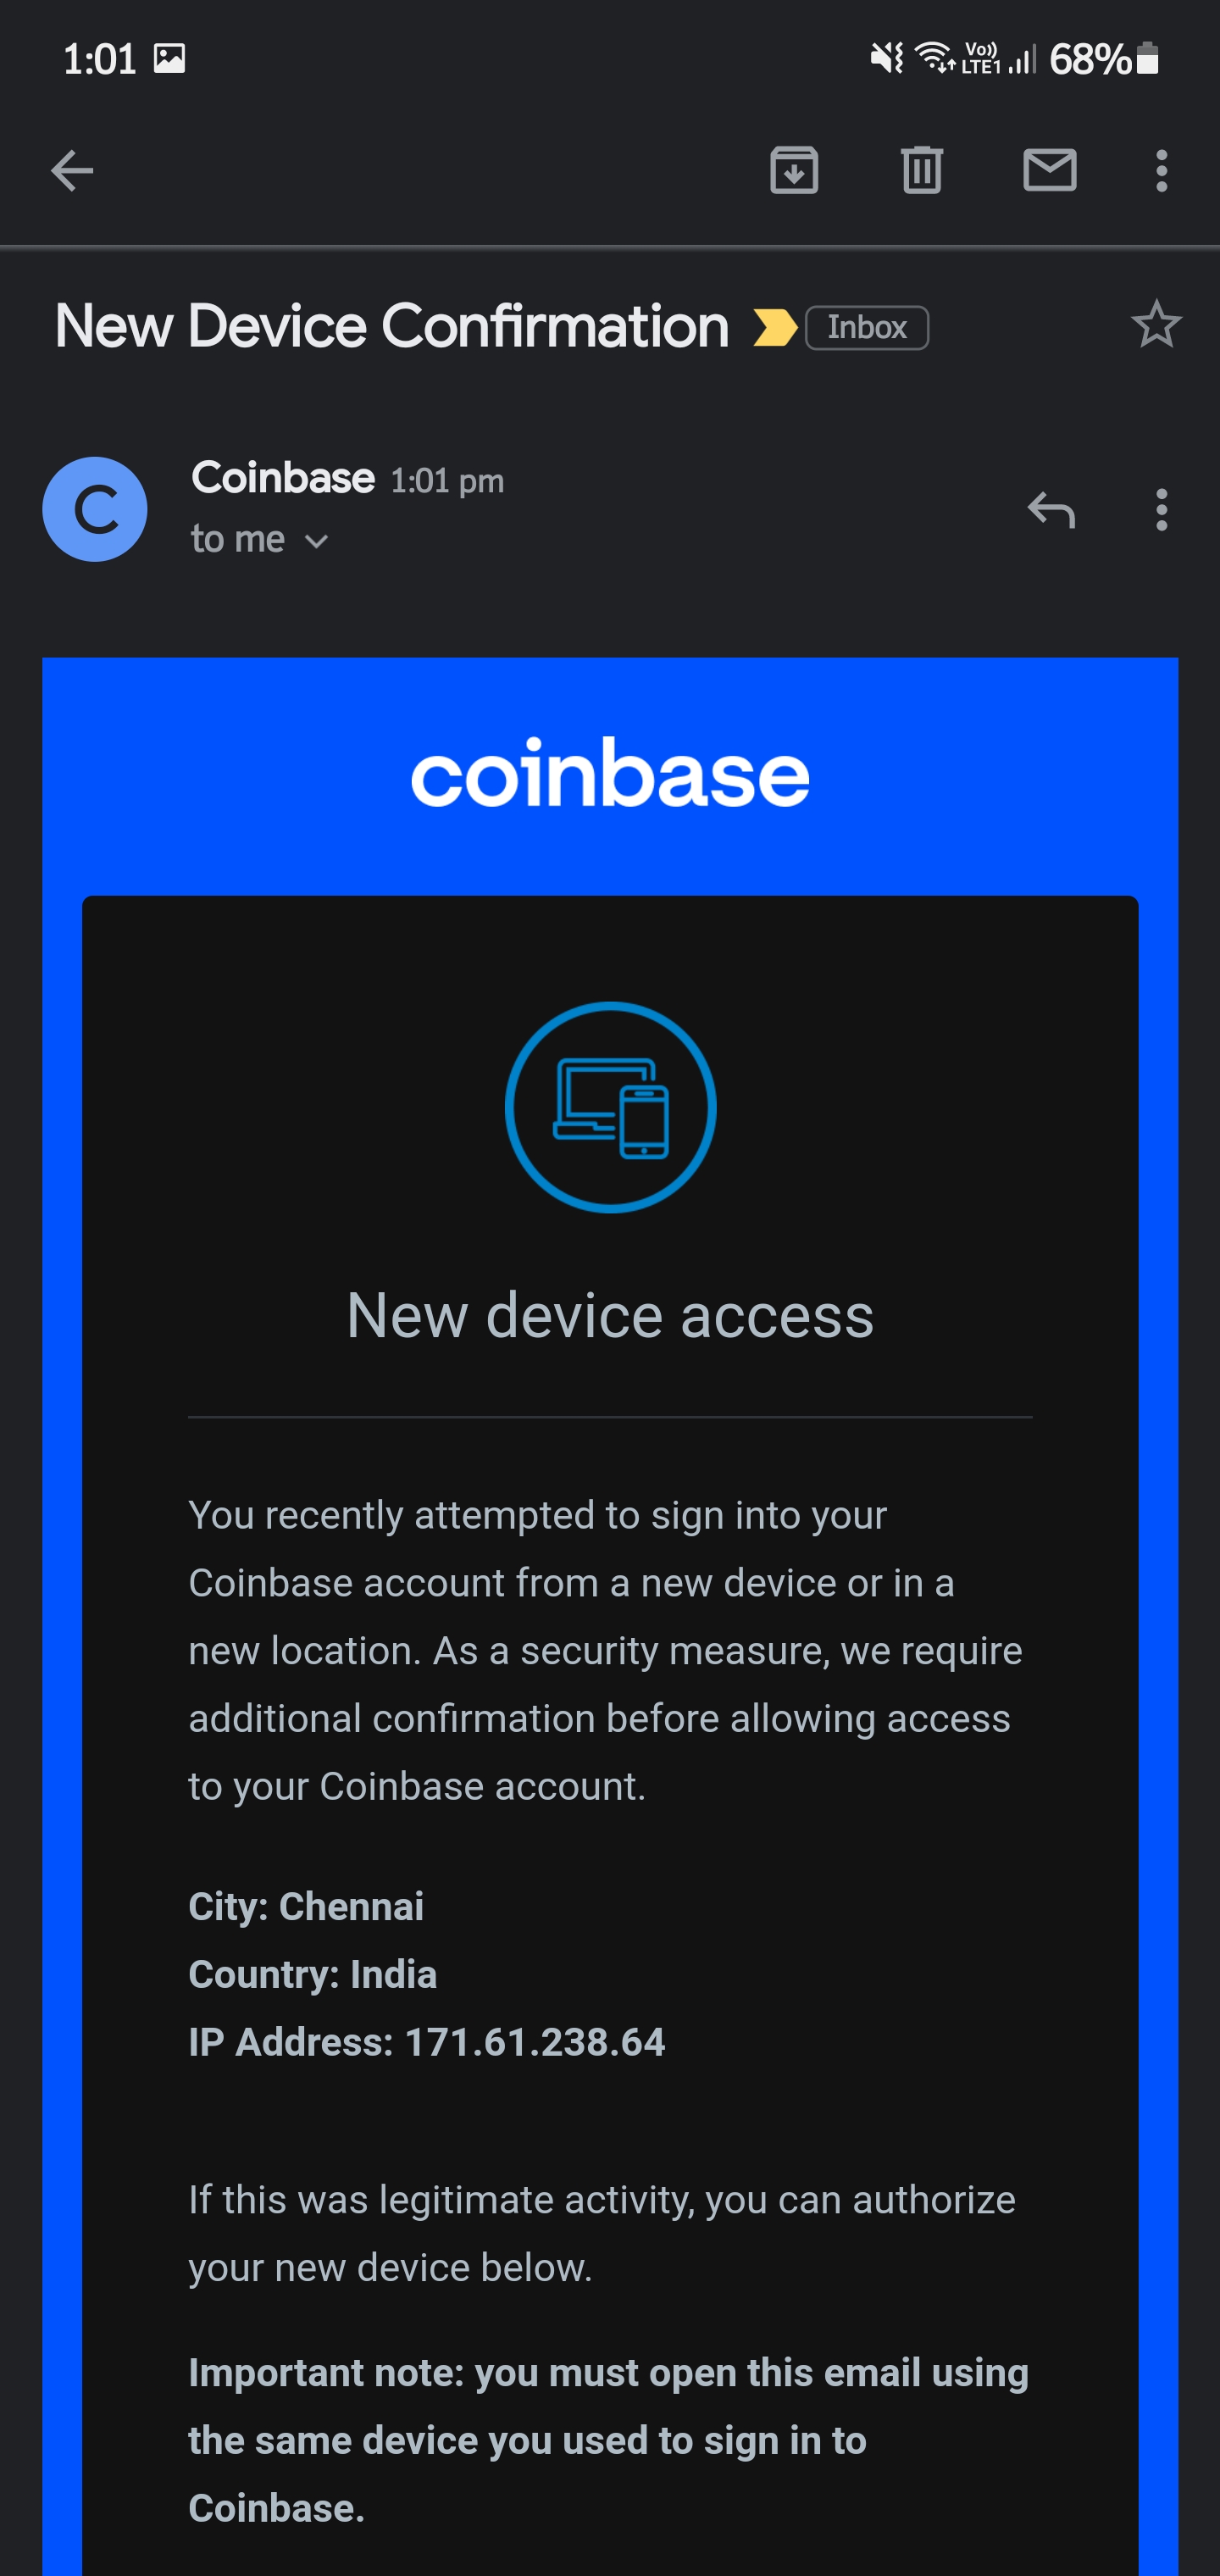 Coinbase customers with hacked accounts get no justice from 'horrible' US laws: Fintech lawyer